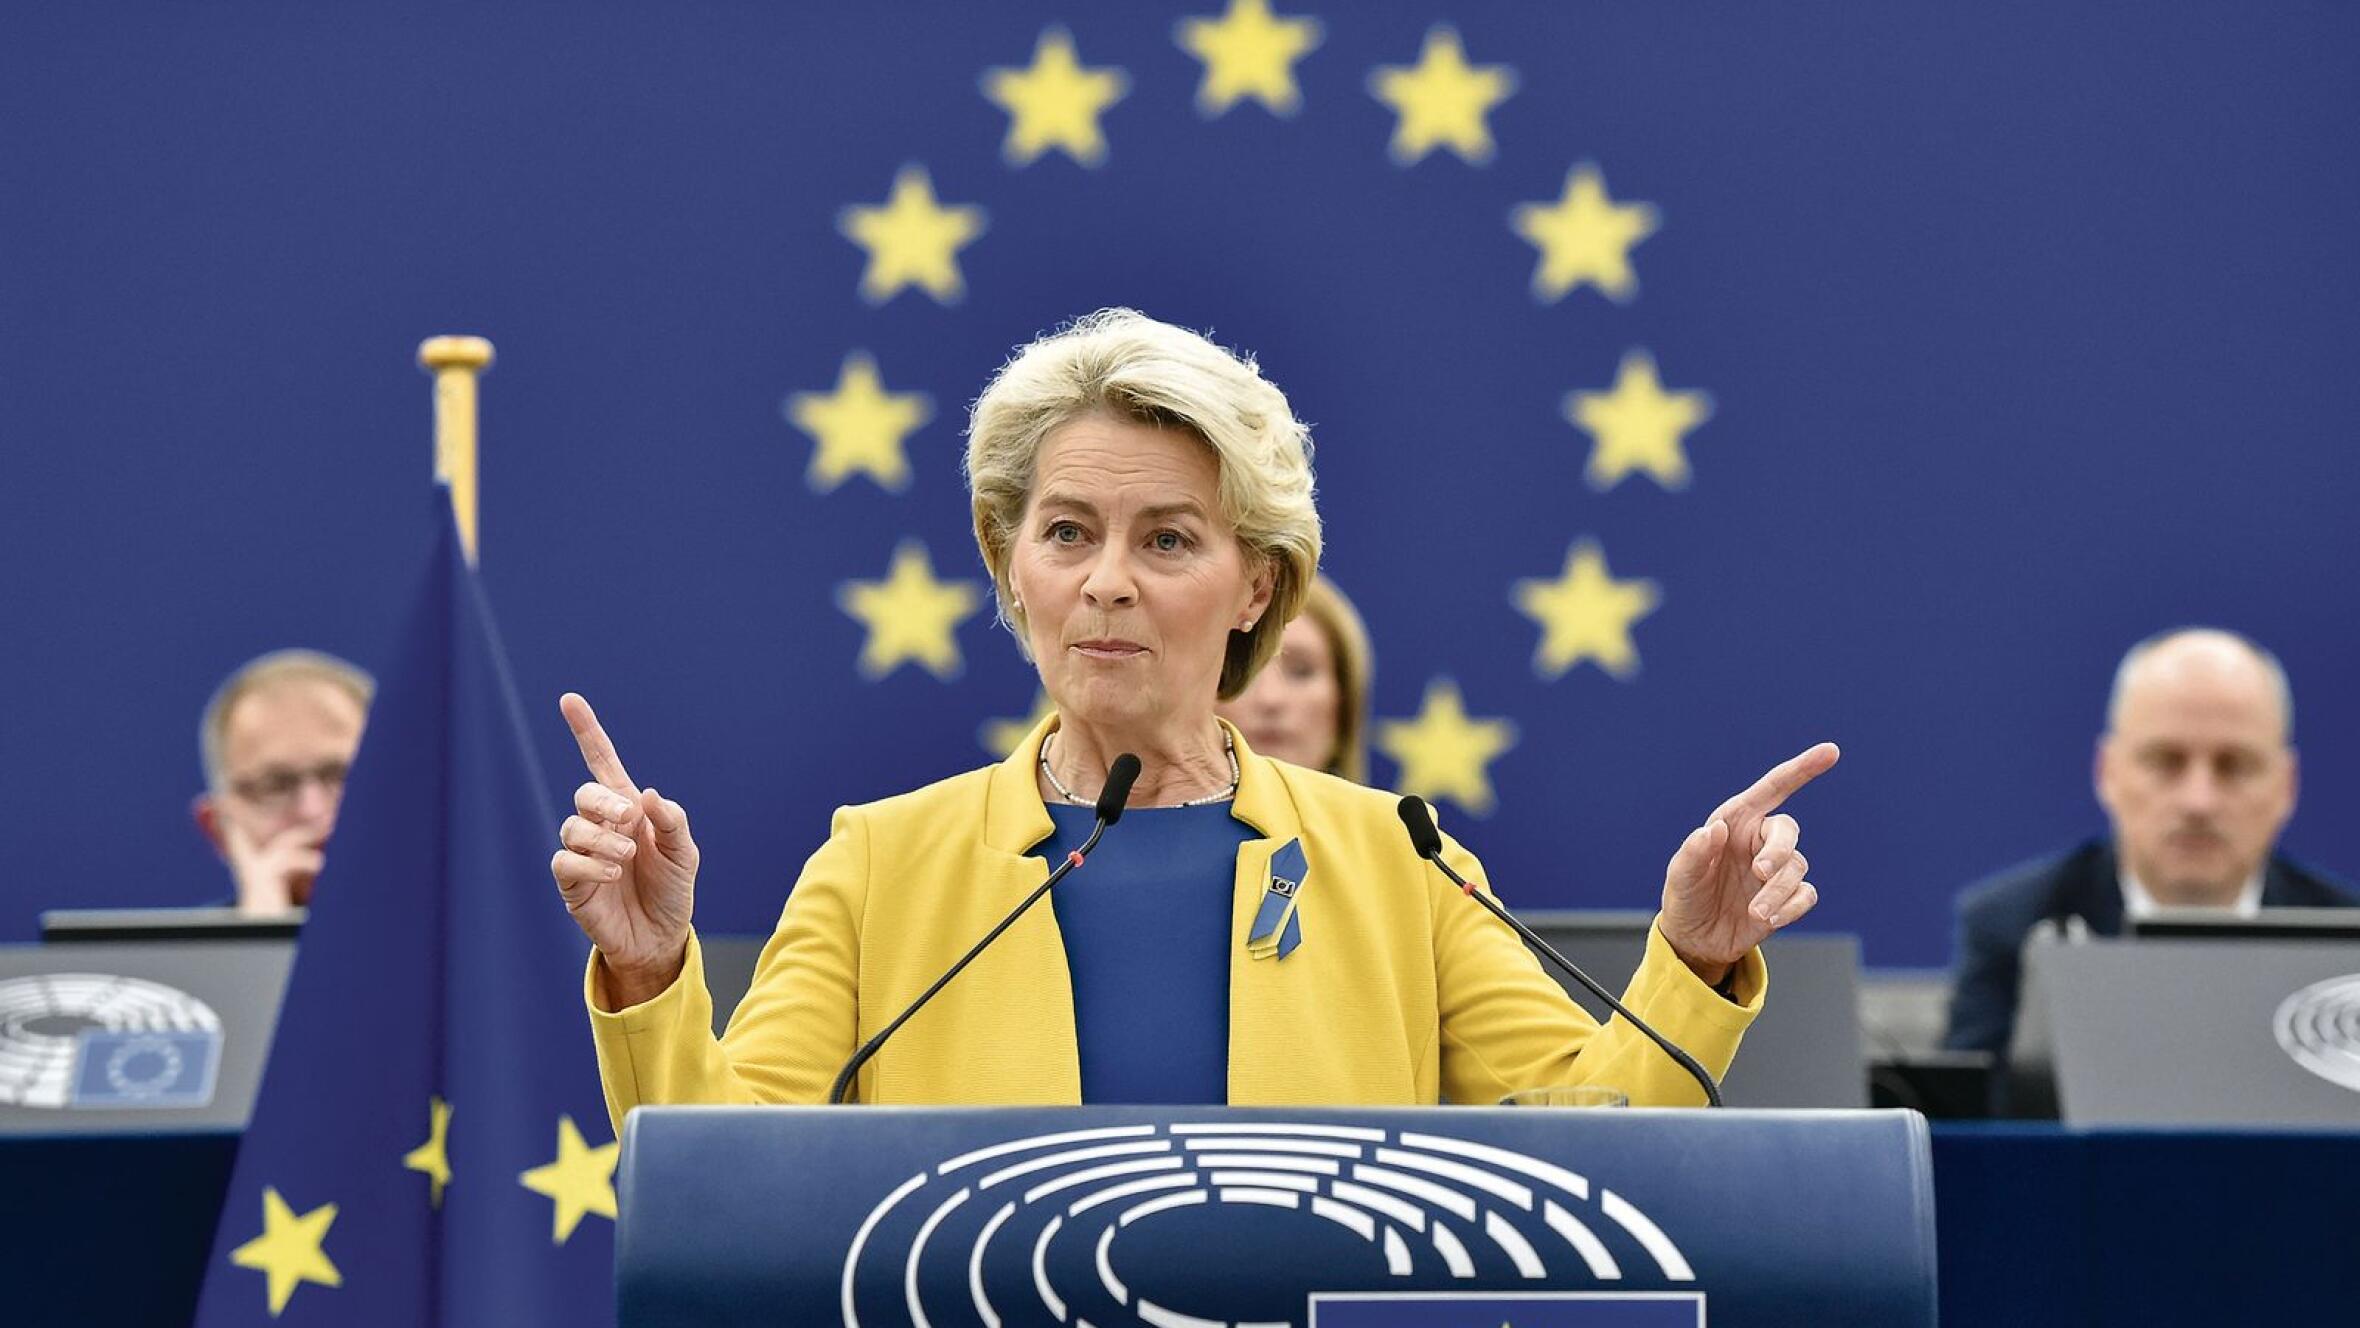 Von der Leyen Calls for Completing the EU with a New Expansion but Without Dates